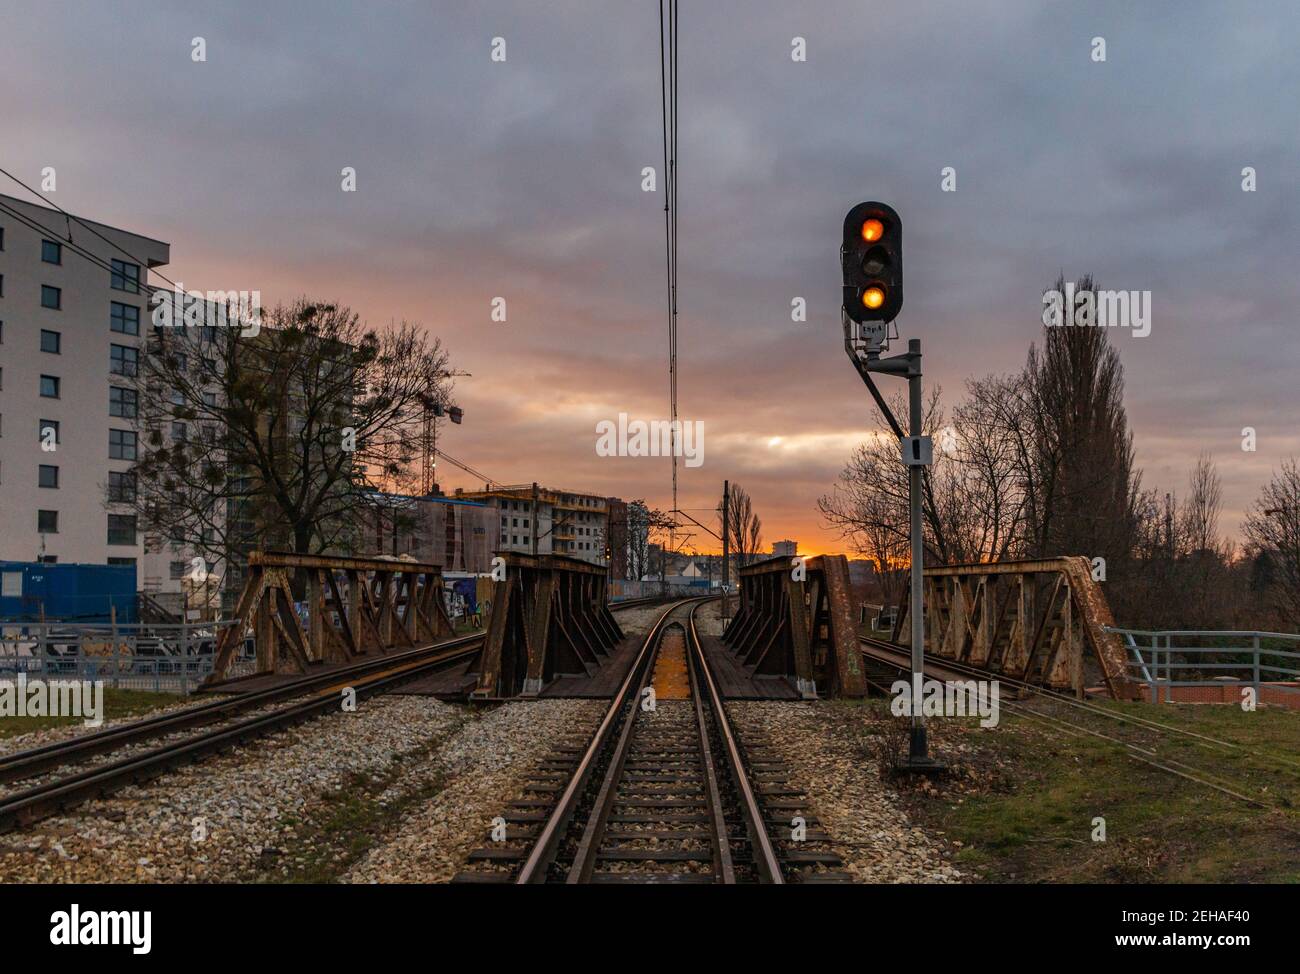 Wroclaw January 10 2020 Train traffic light in front of small railway bridges Stock Photo